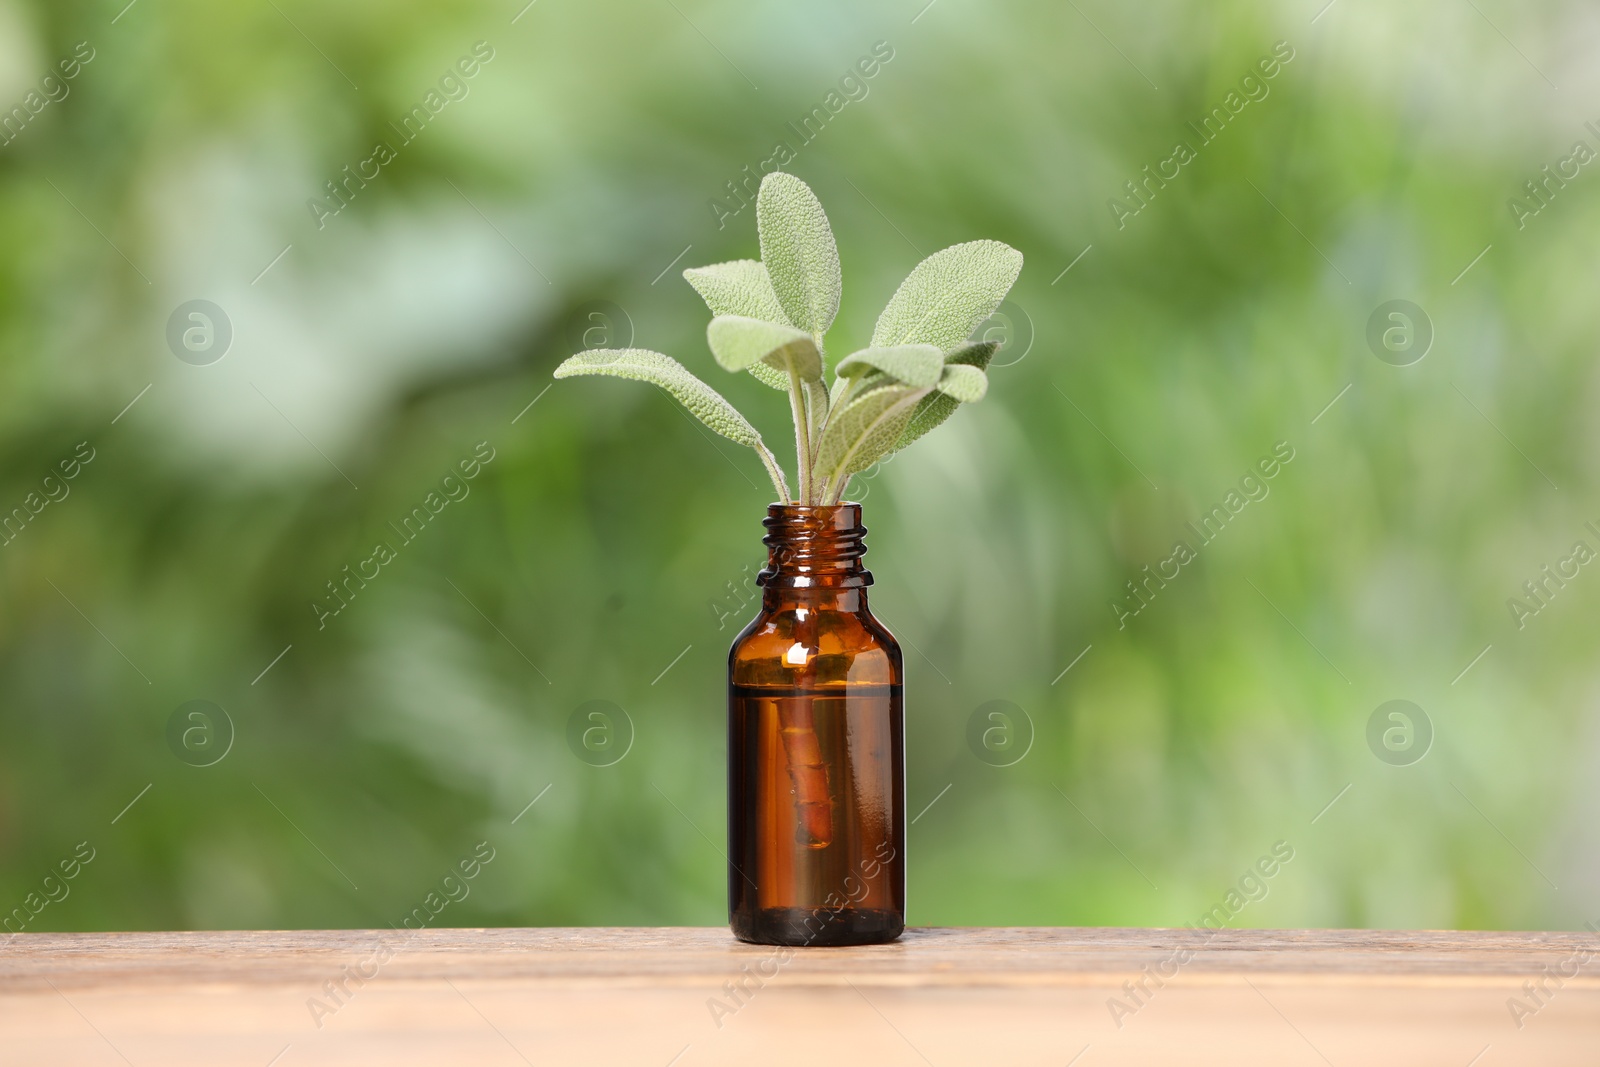 Photo of Bottle with essential oil and sage on wooden table against blurred green background